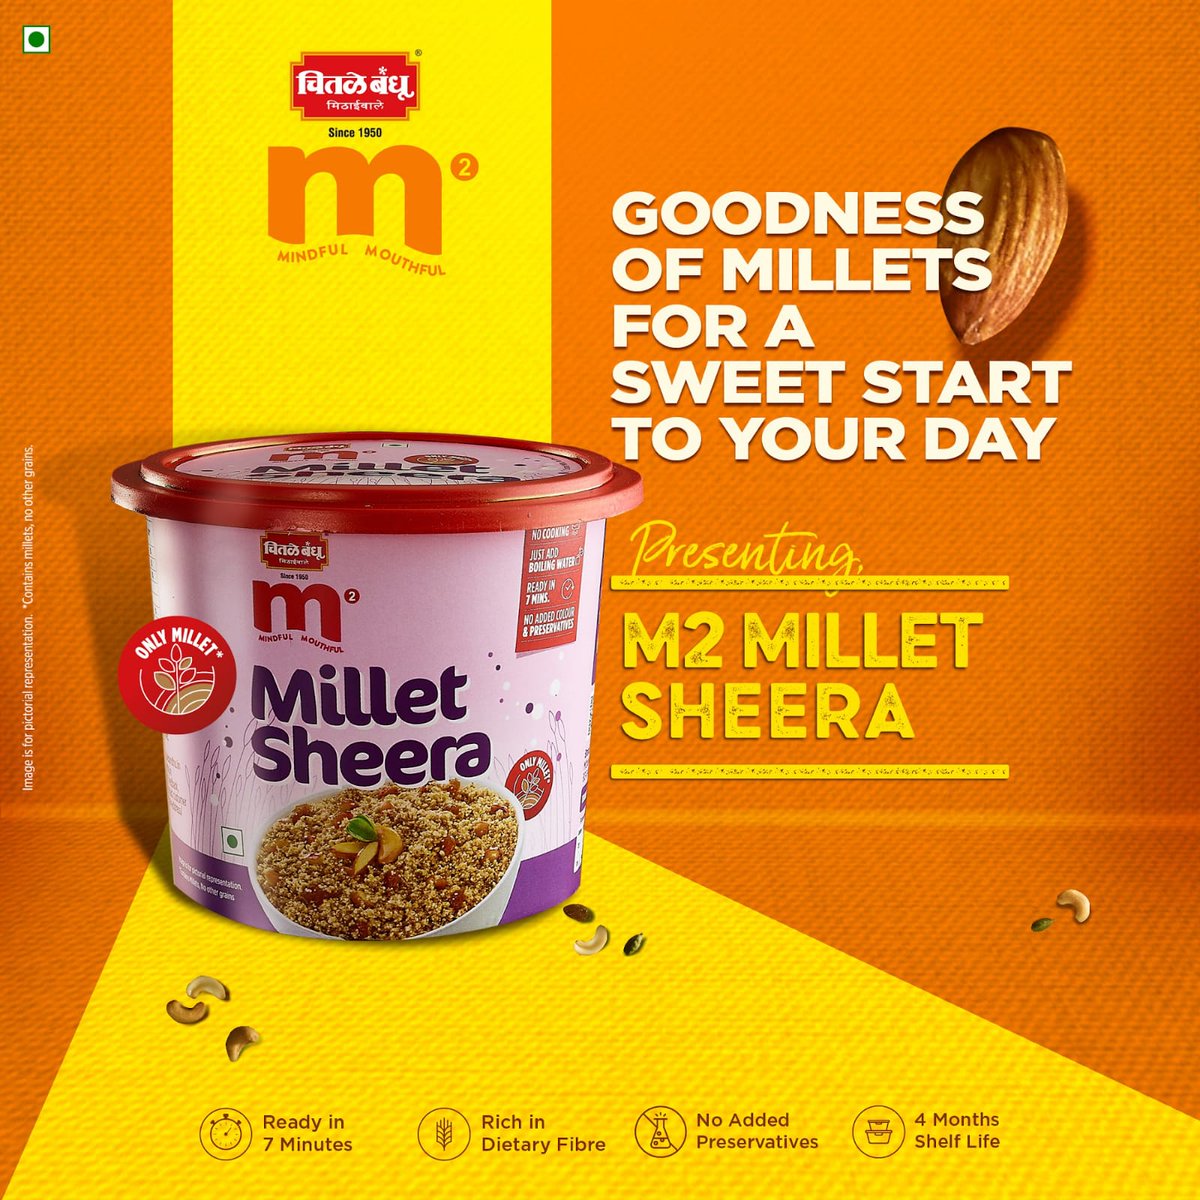 Dive into guilt-free sweetness with this delicious meal. Relish the goodness of millet with this Millet Sheera by M2.
✅No cooking, just add boiling water
✅No added preservatives 
✅Ready to eat in just 7 minutes

#ReadyToCook #MilletSheera #MilletMeals #EasyToCook